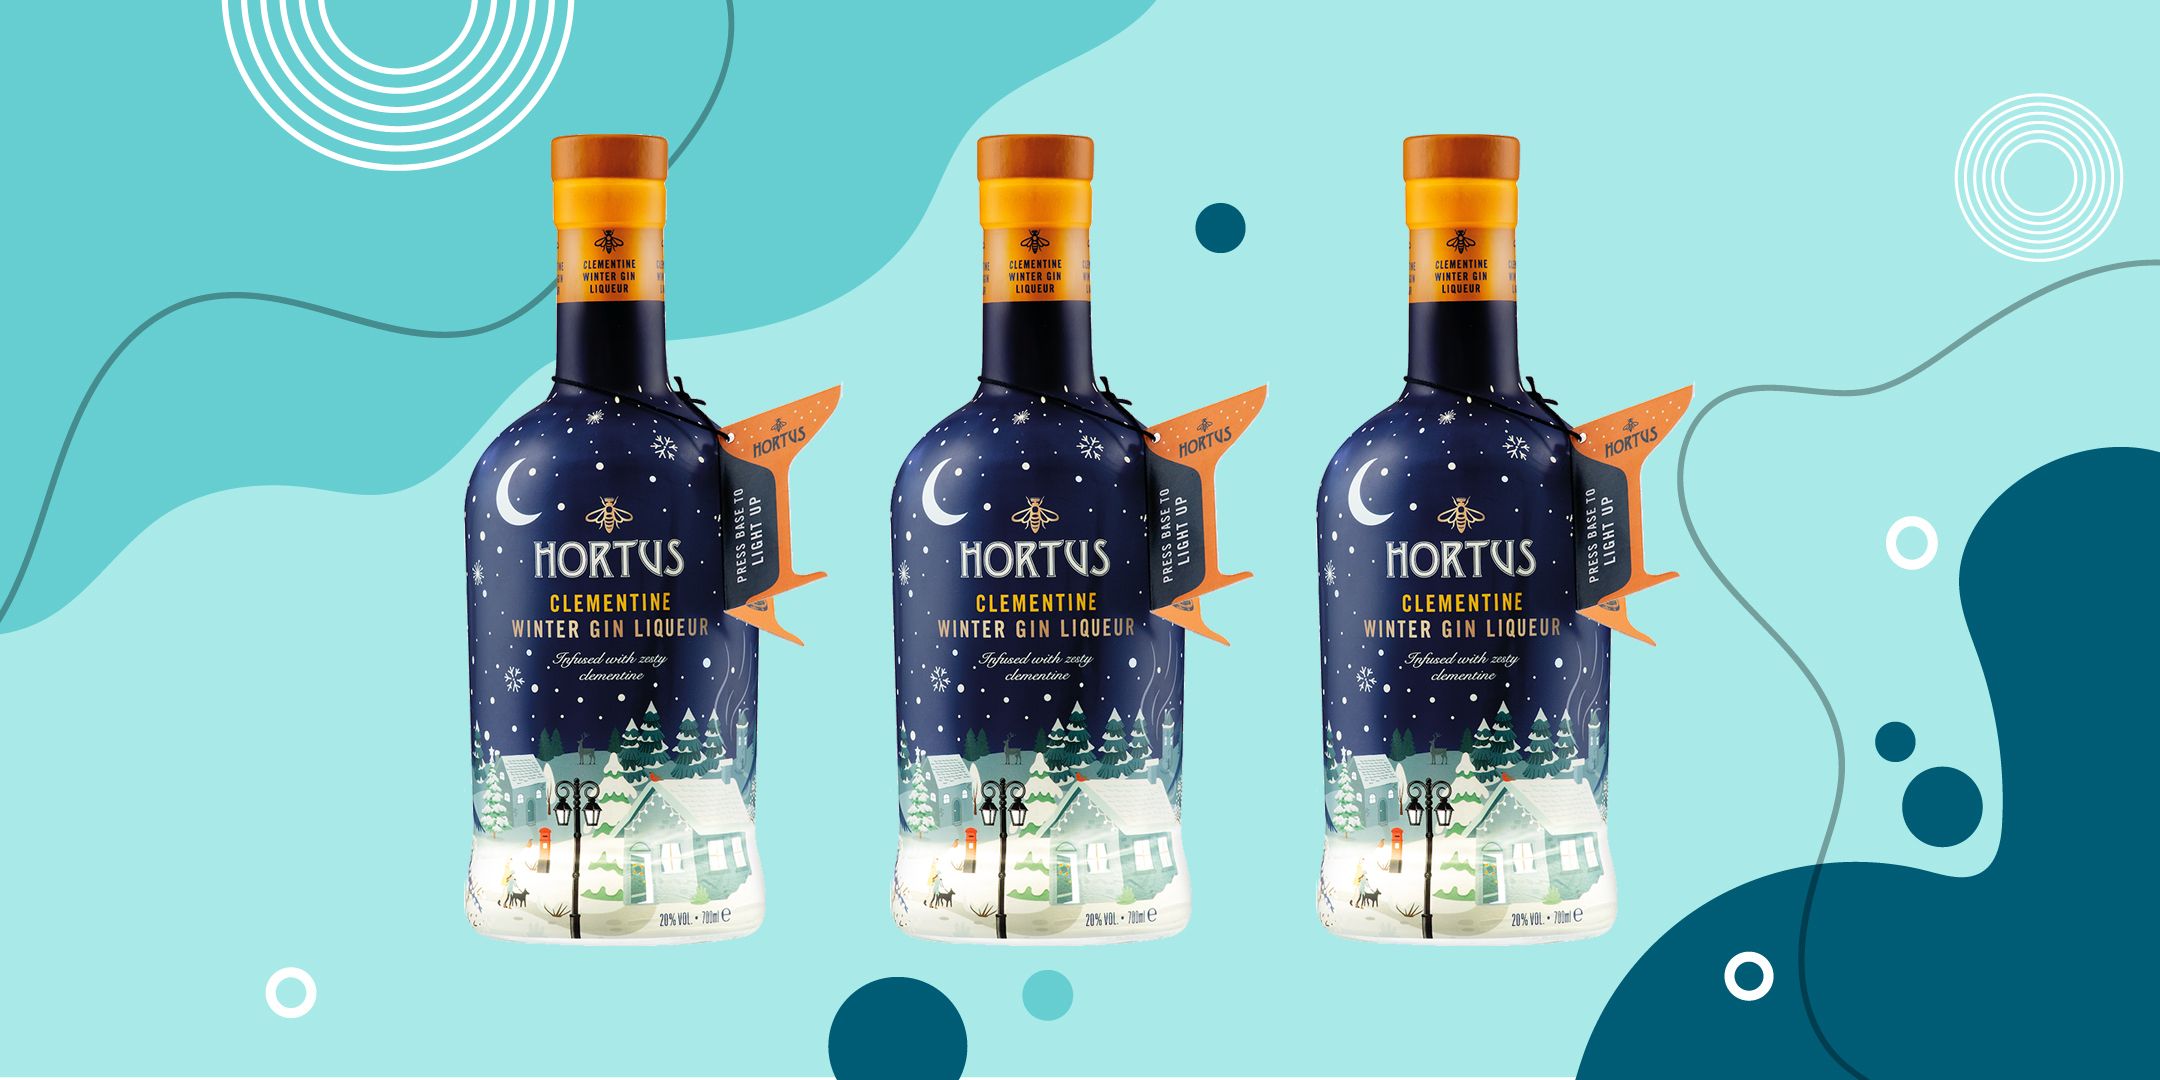 Lidl Launches A Light-Up Gin For Christmas